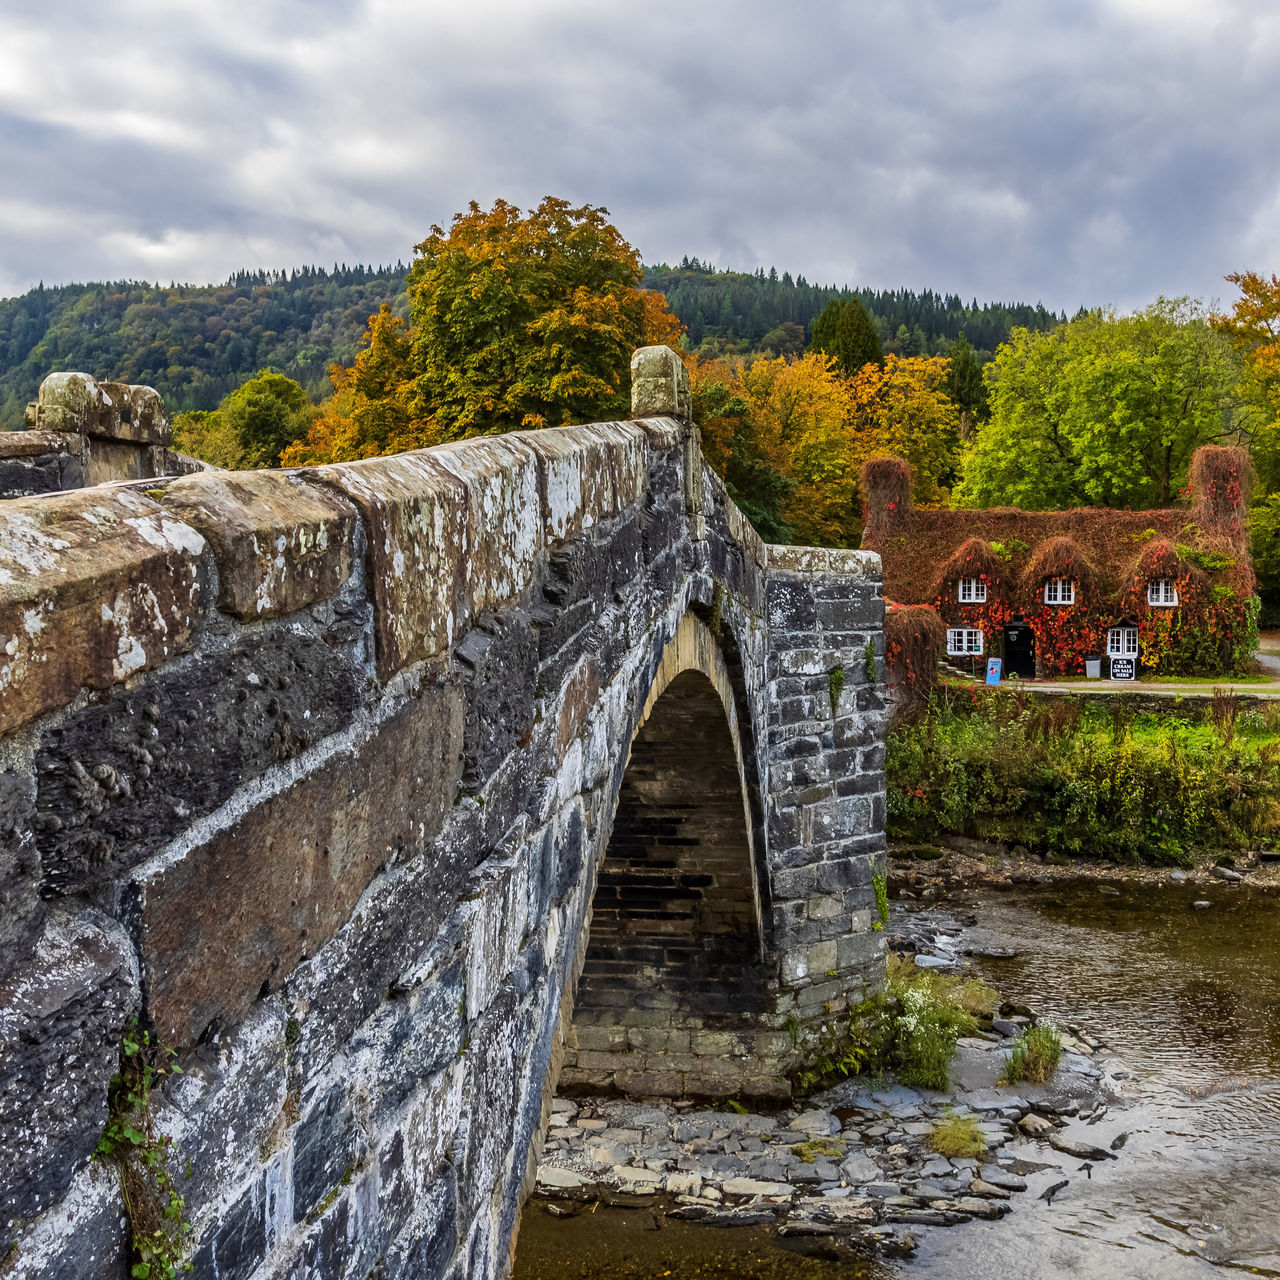 architecture, built structure, water, nature, cloud, sky, bridge, history, river, the past, travel destinations, plant, tree, rock, no people, travel, environment, tourism, ancient, ruins, landscape, waterway, outdoors, wall, stone material, arch, autumn, stone wall, scenics - nature, building exterior, land, day, old, rural area, building, transportation